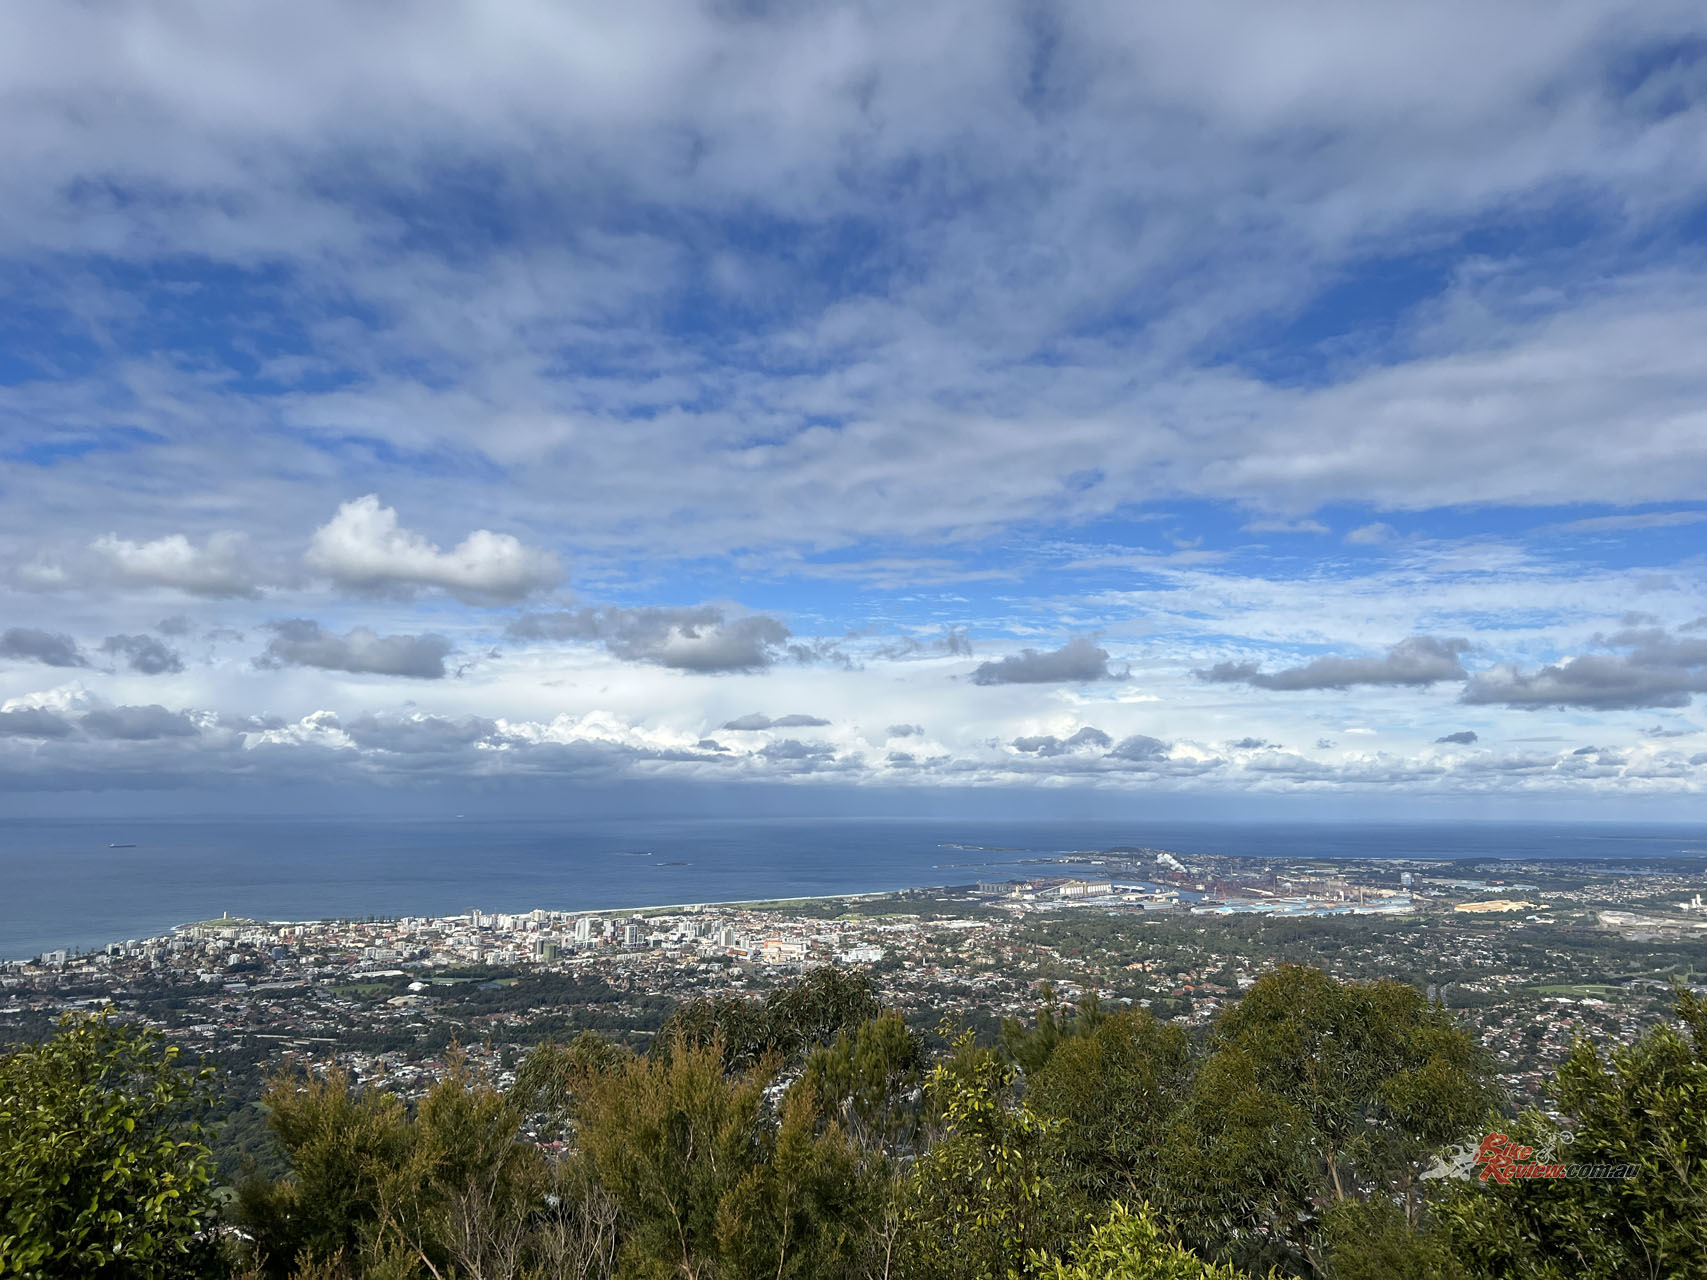 Make sure you stop up at the Mount Keira lookout, the view over the Illawarra is spectacular. 